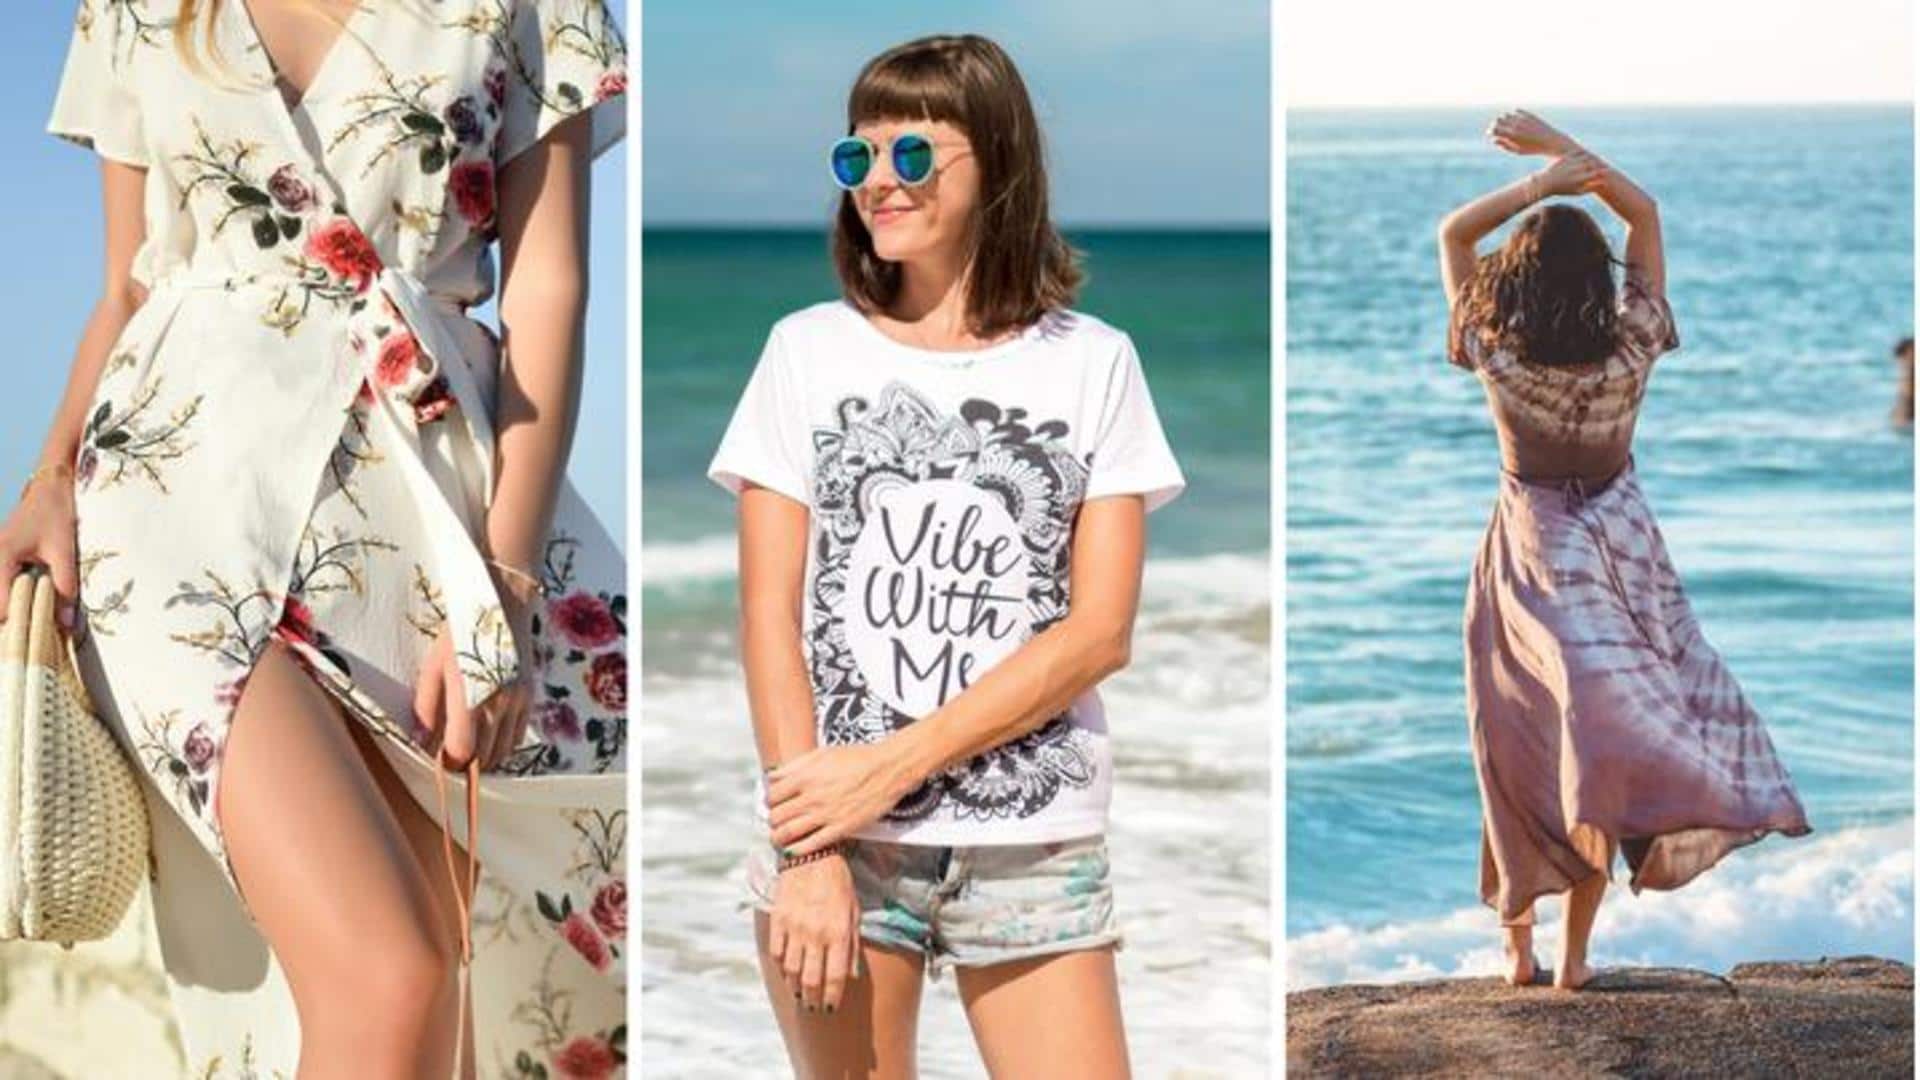 Planning a beach vacation? Give these outfit ideas a try